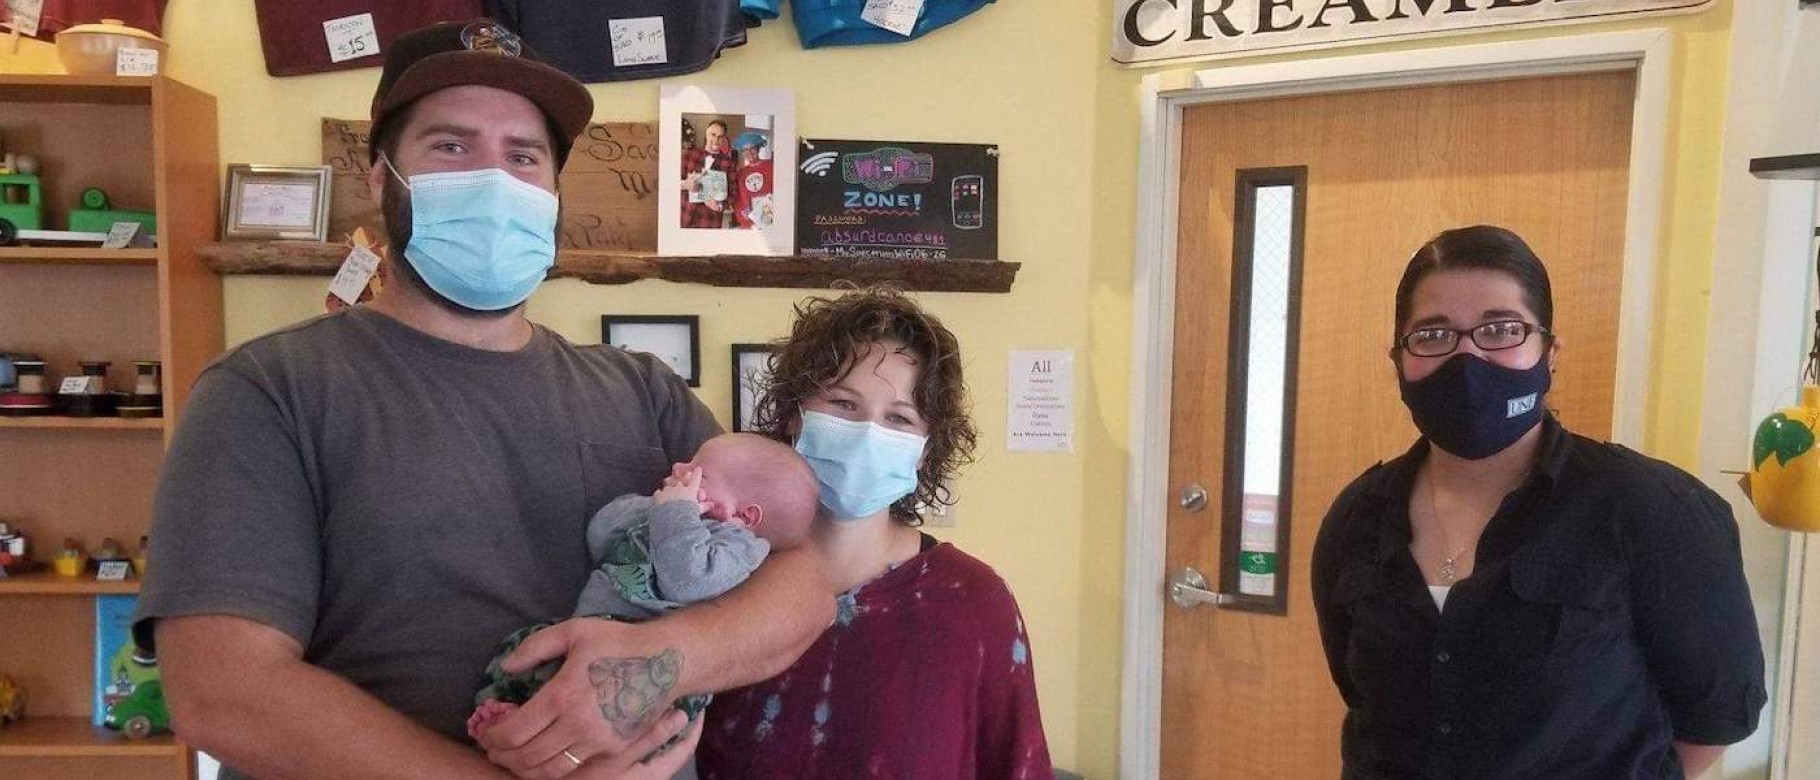 Jadin James (D.O., ’24) helped Morgan Redmond (center) when she went into sudden labor at the Saco Scoop in mid-September. Morgan's husband, Kris Redmond, is at left, holding baby Onyx. Photo courtesy of Jadin James/Saco Scoop.